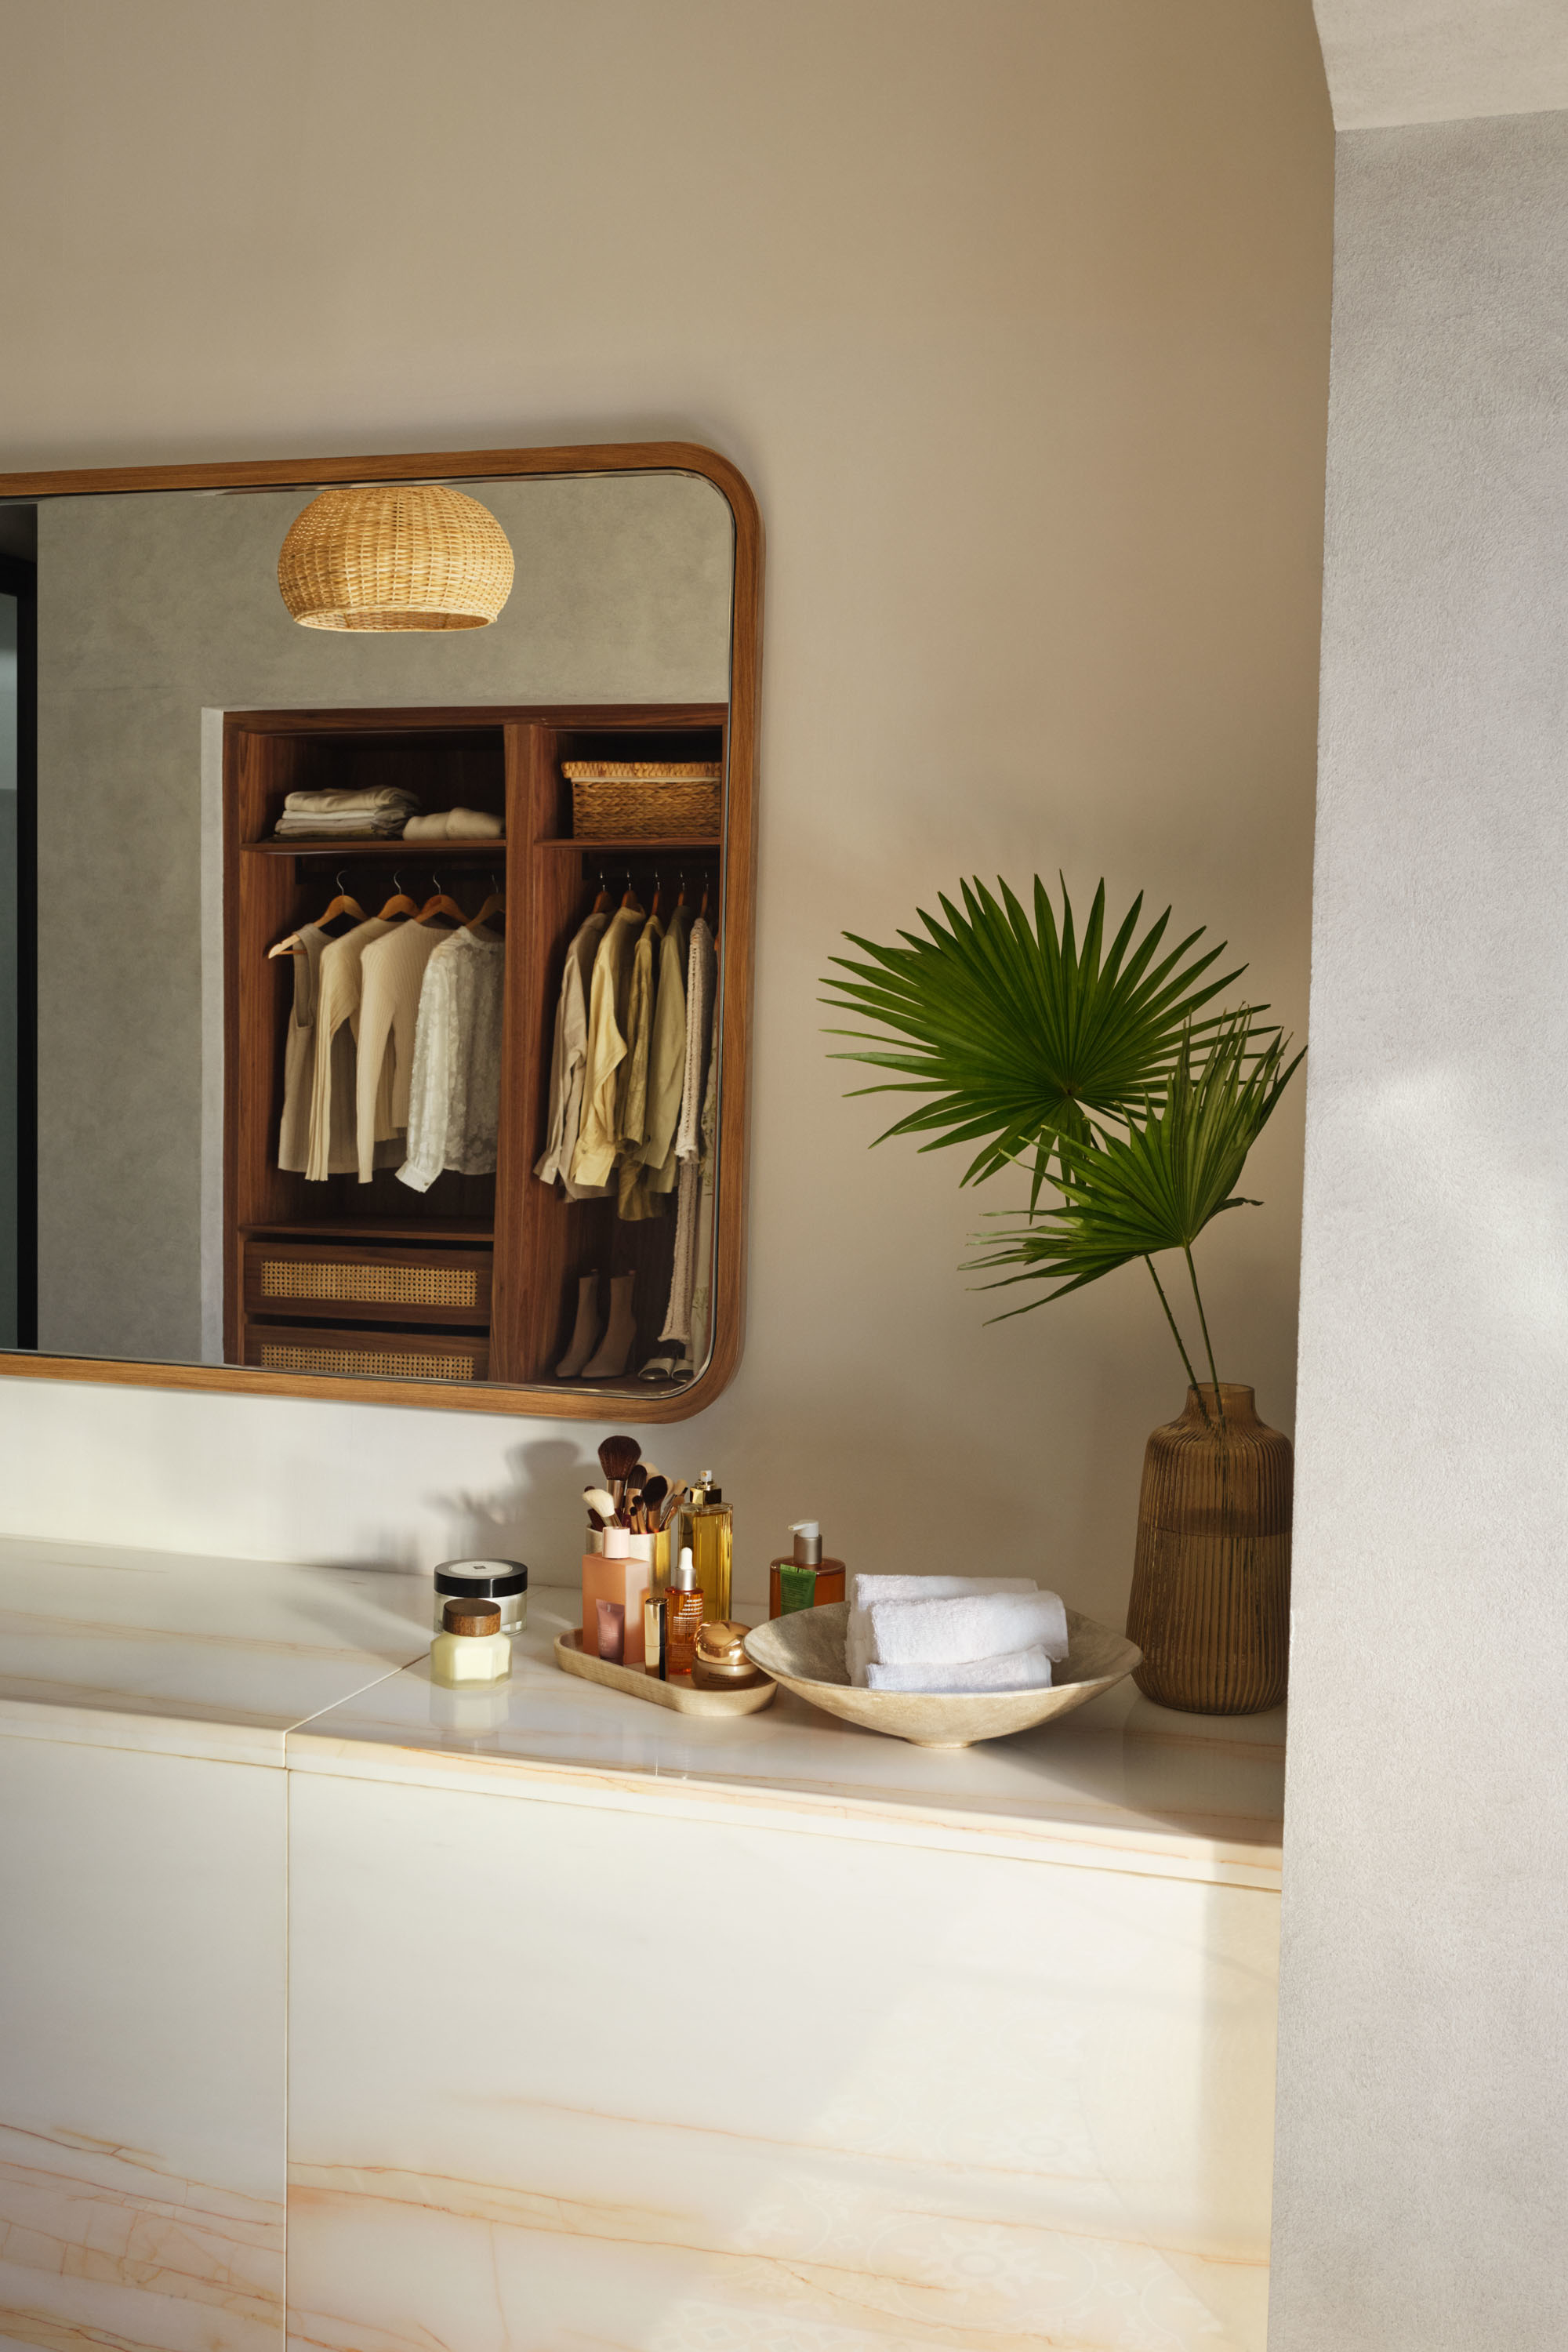 A bathroom vanity with a mirror above, showcasing neatly organized toiletries and towels, adjacent to a plant